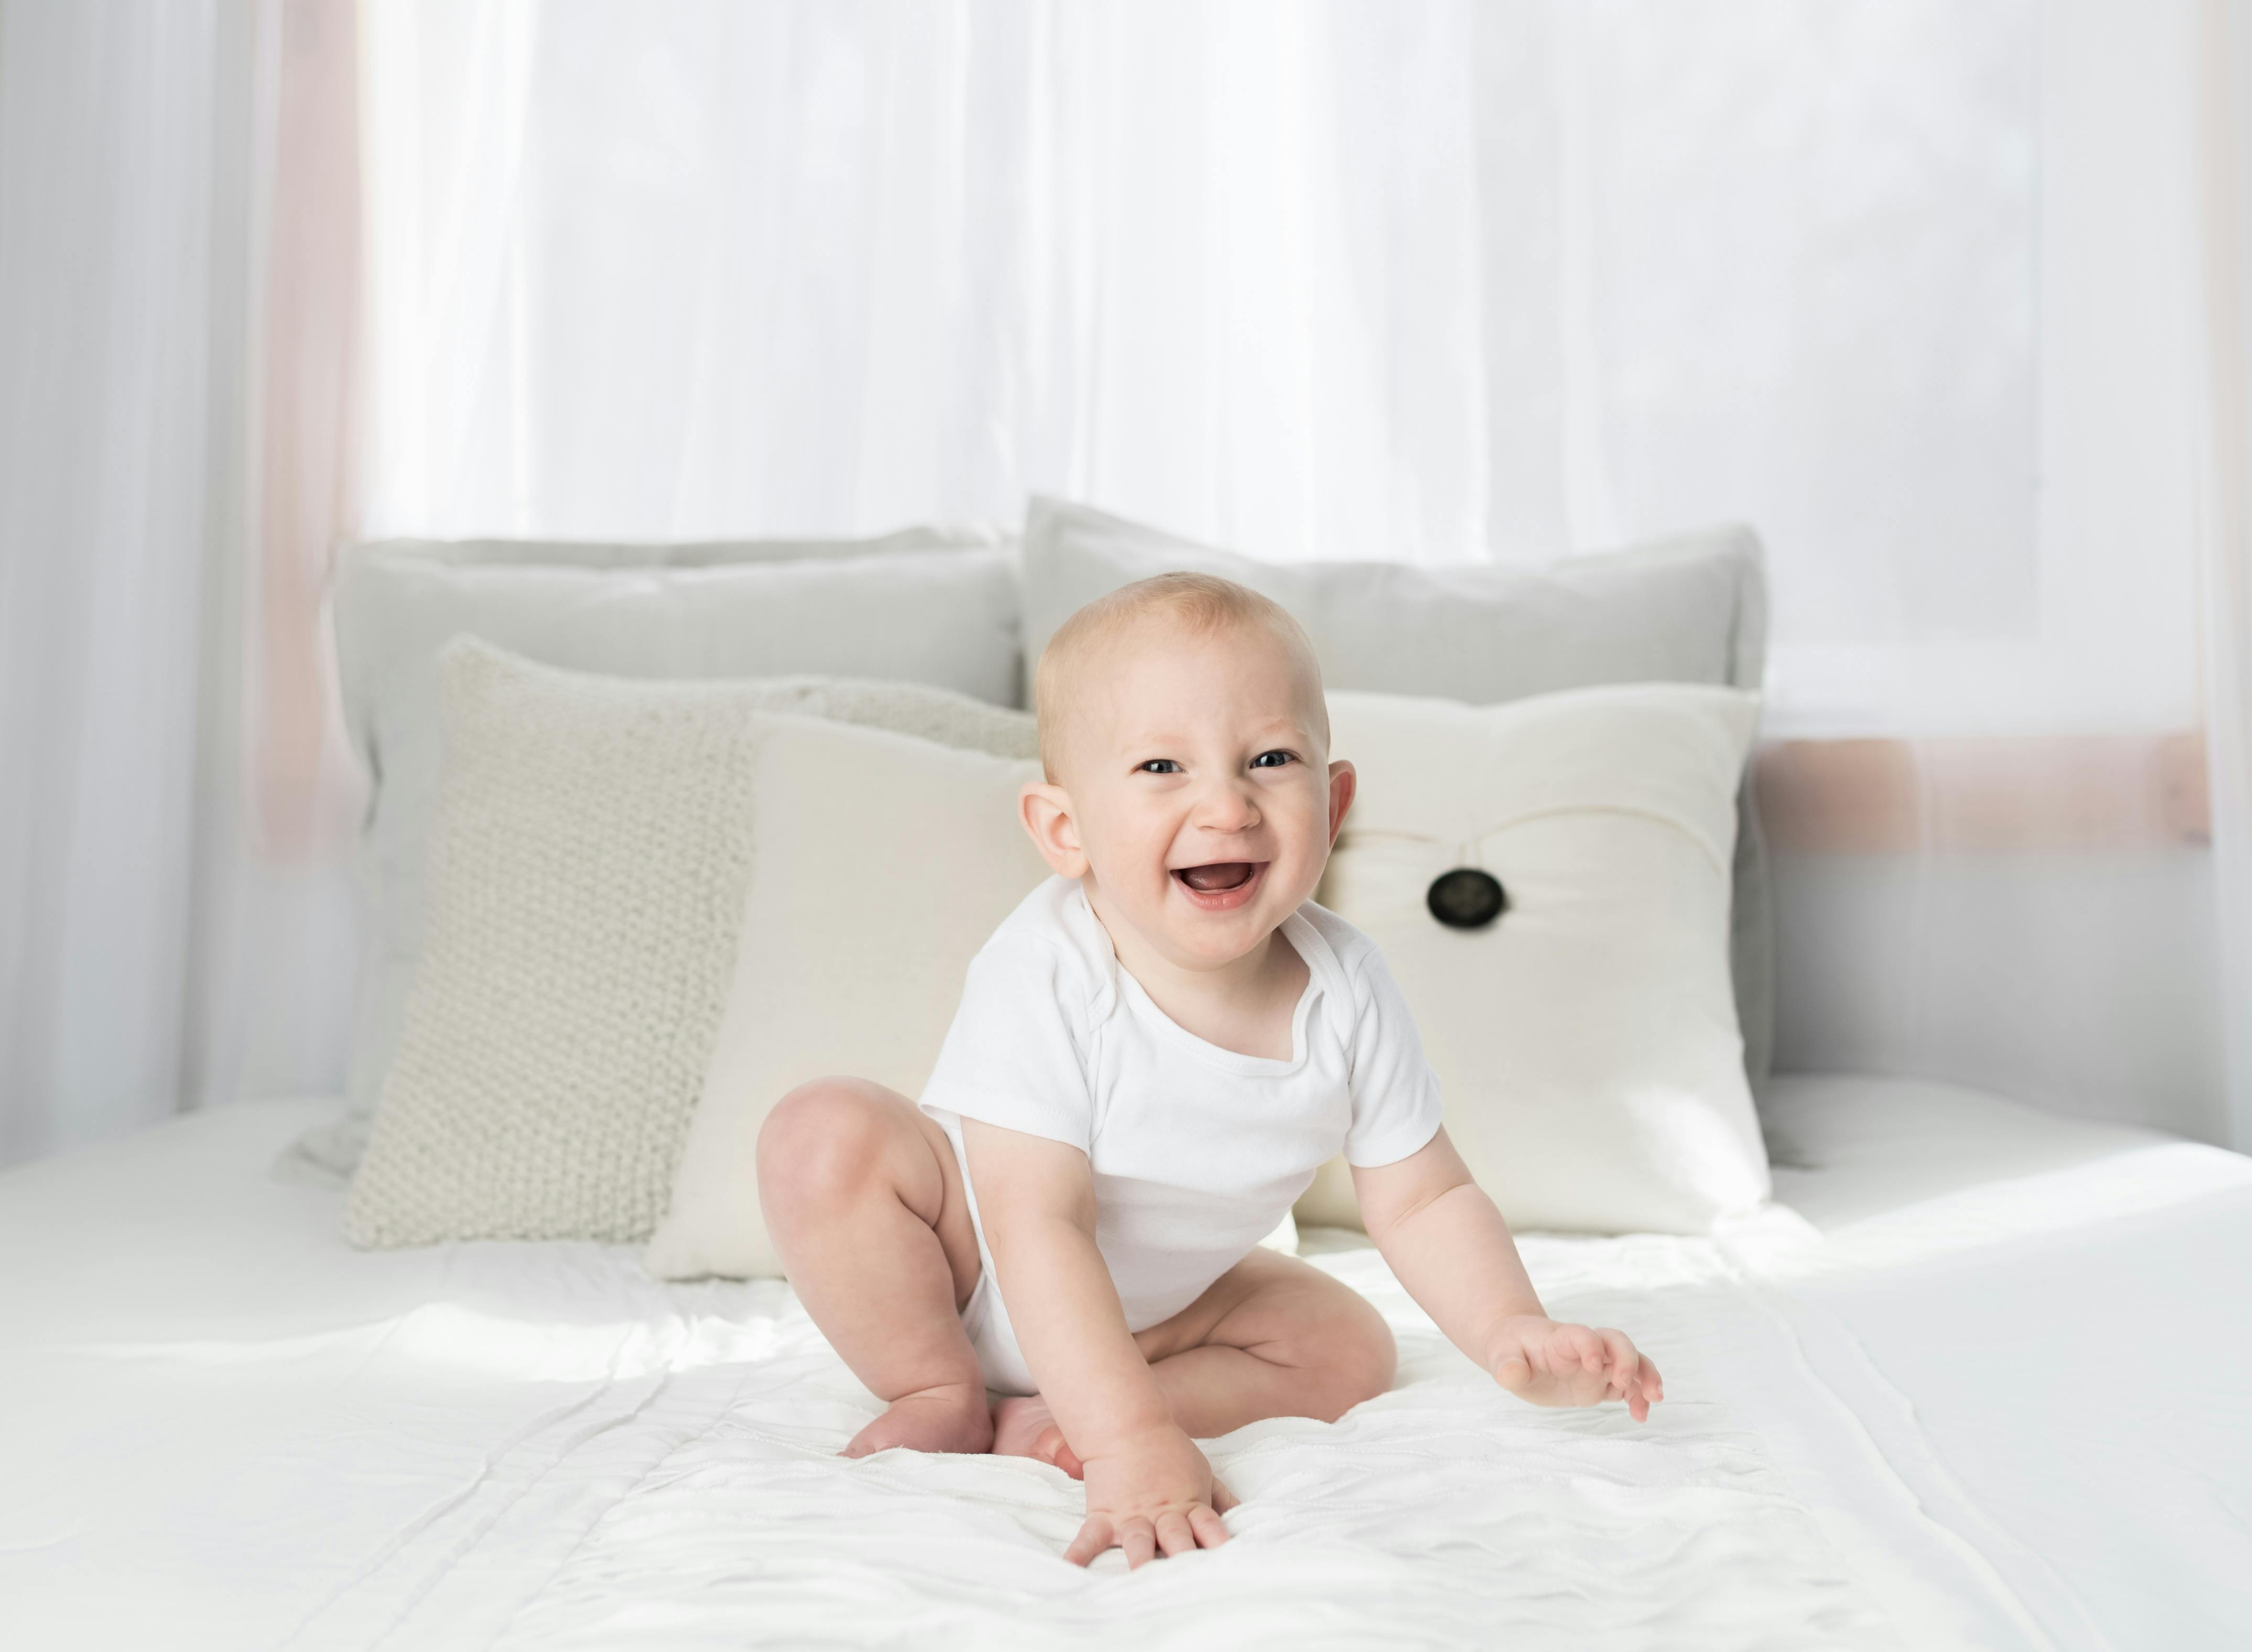 Baby Room Temperature Monitor Stock Photo - Download Image Now